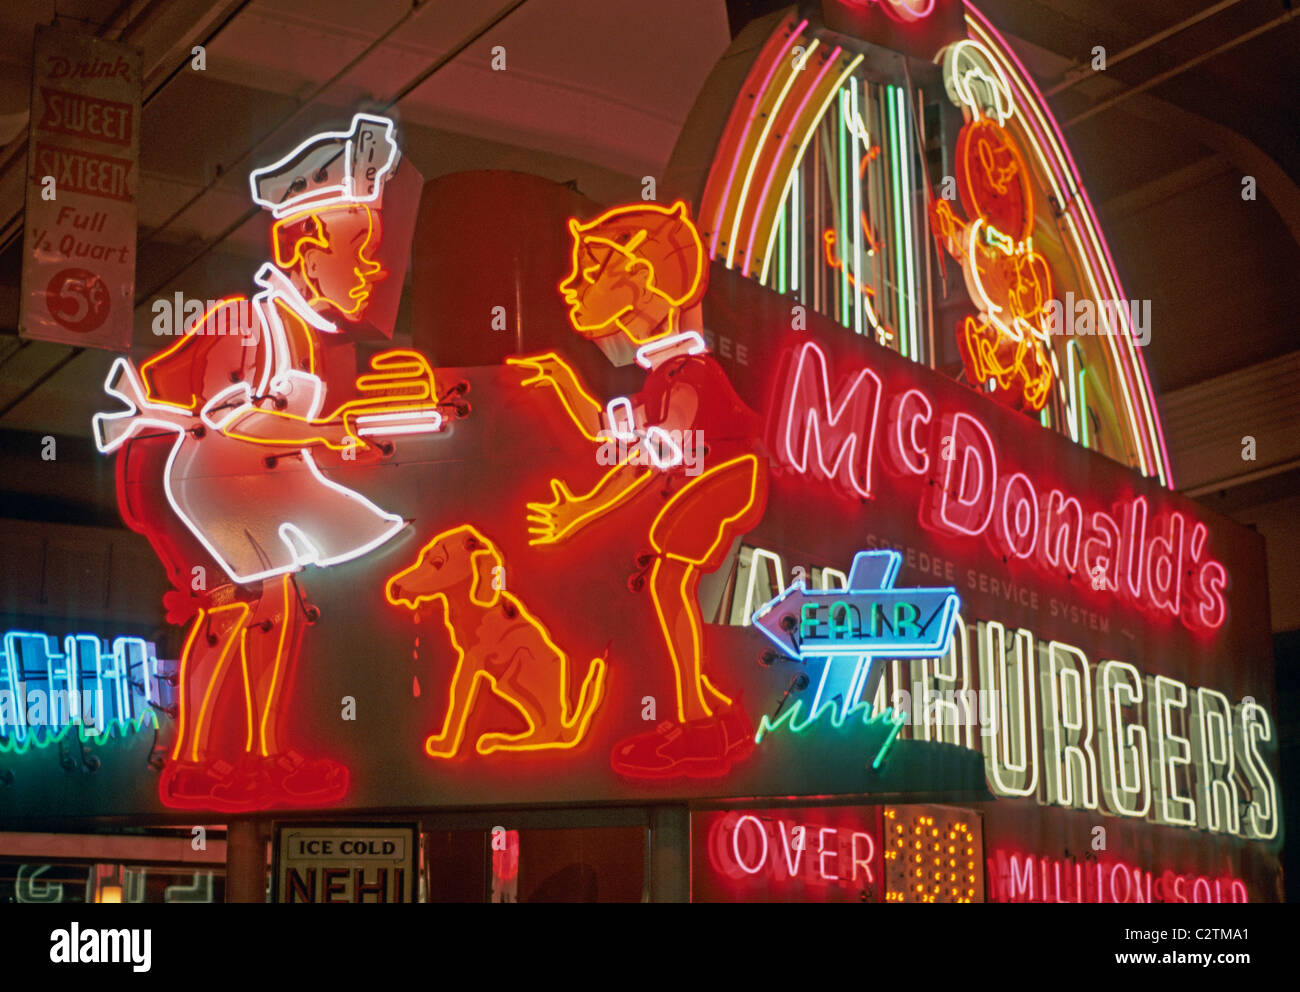 Neon sign advertising display at the Henry Ford Museum. McDonald's ...